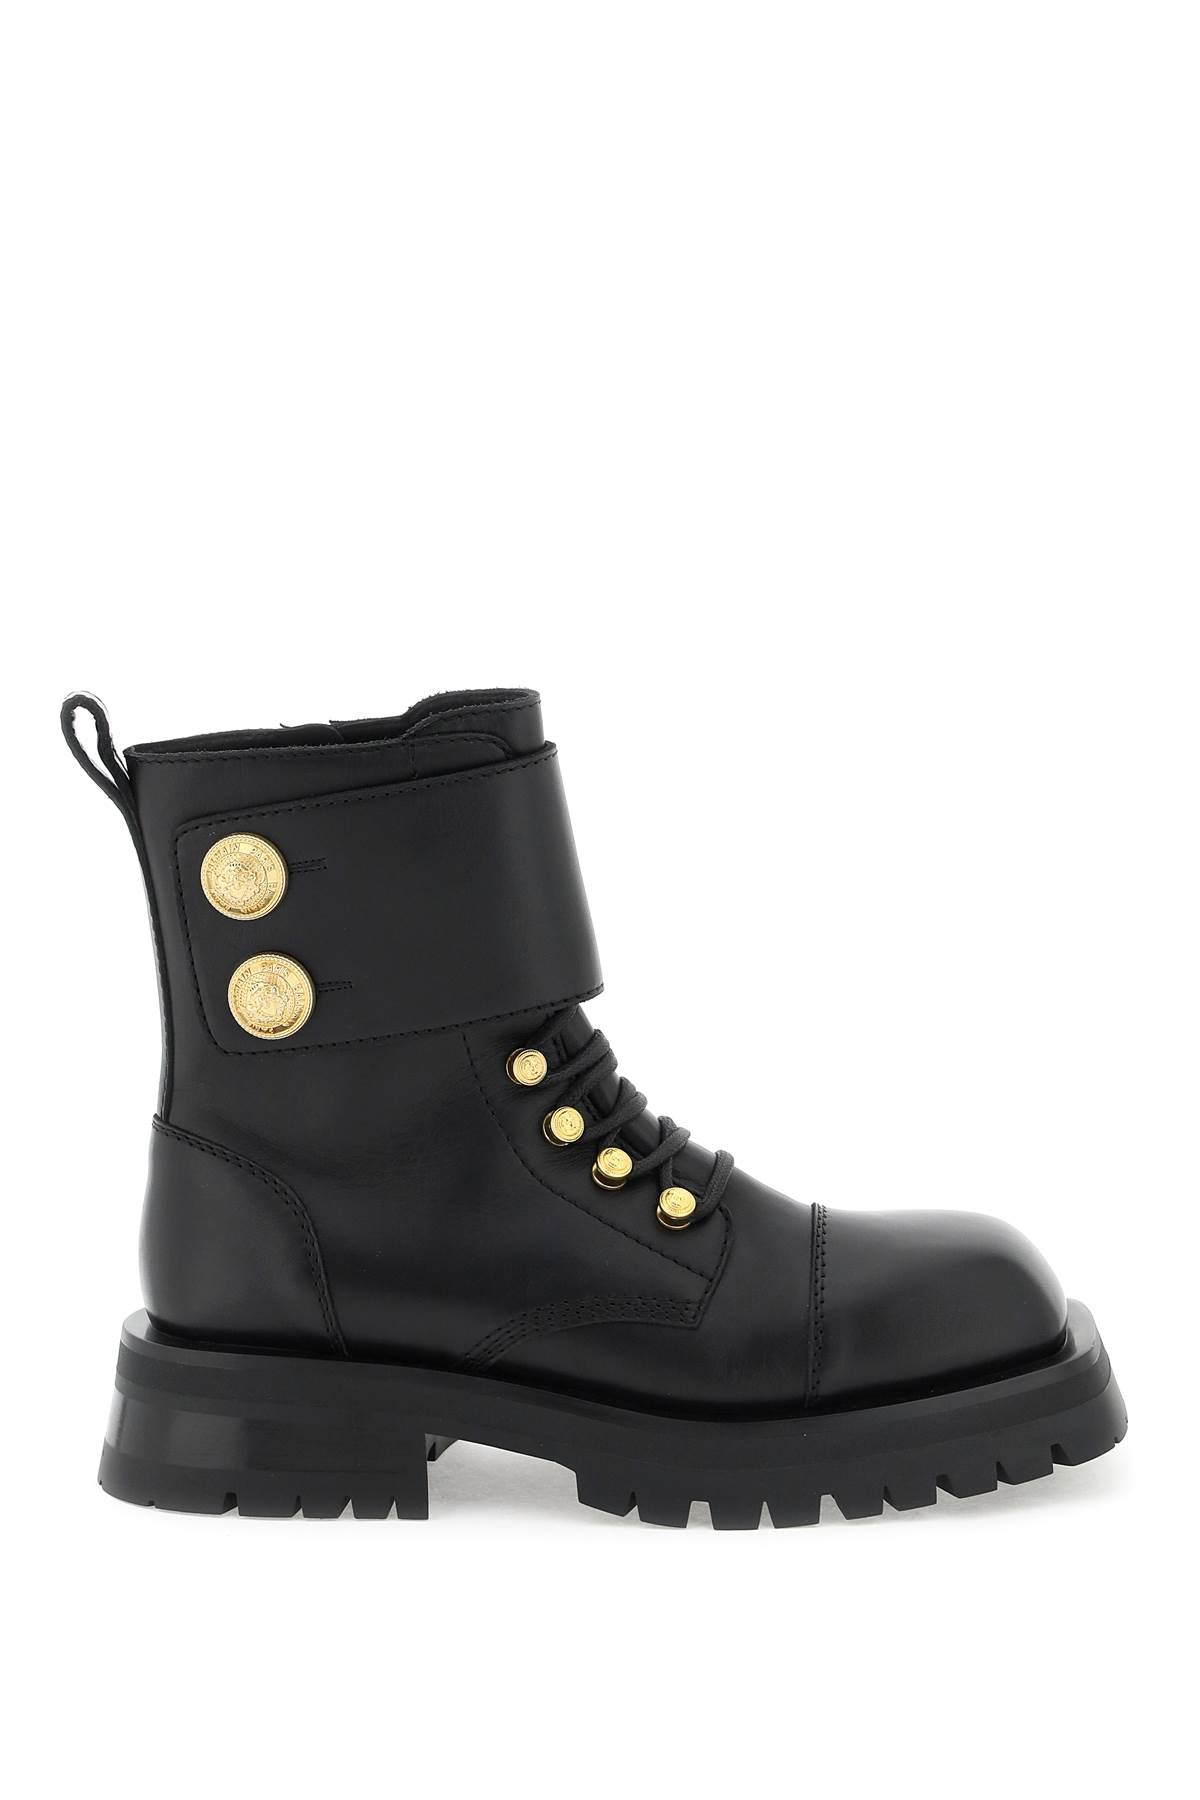 Shop Balmain Women's Leather Ranger Boots With Maxi Buttons In Black